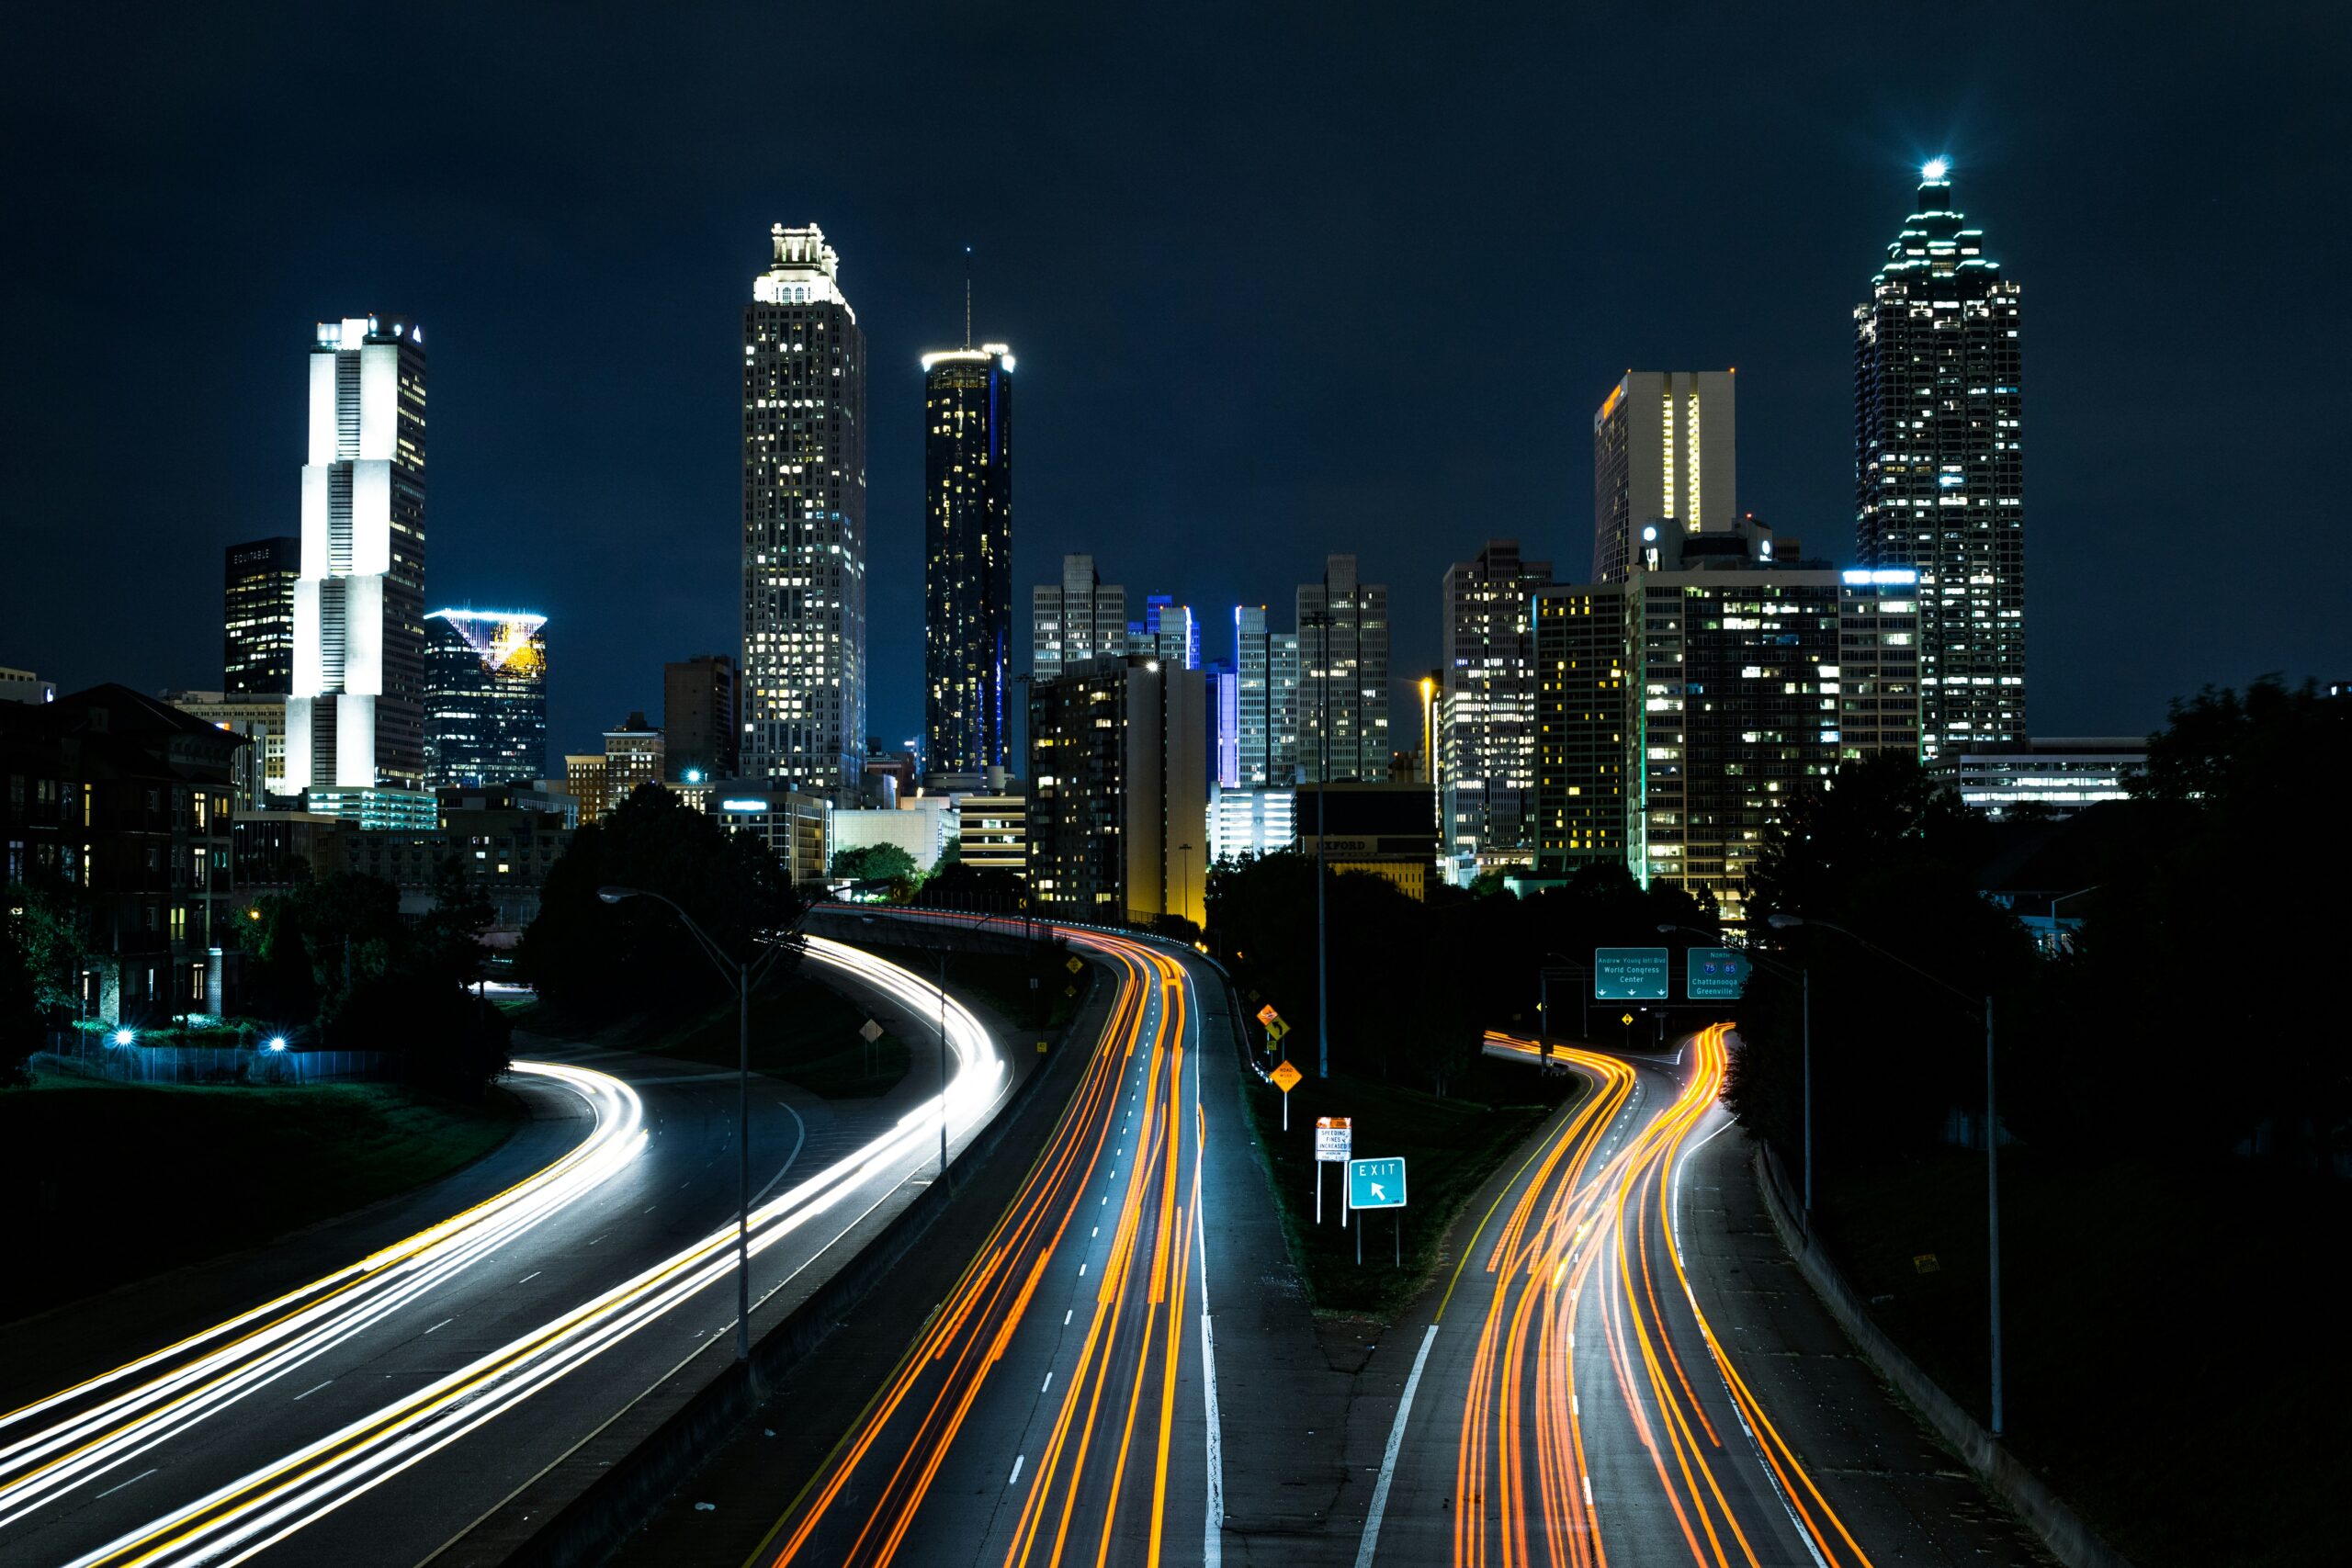 highways and a city skyline at night